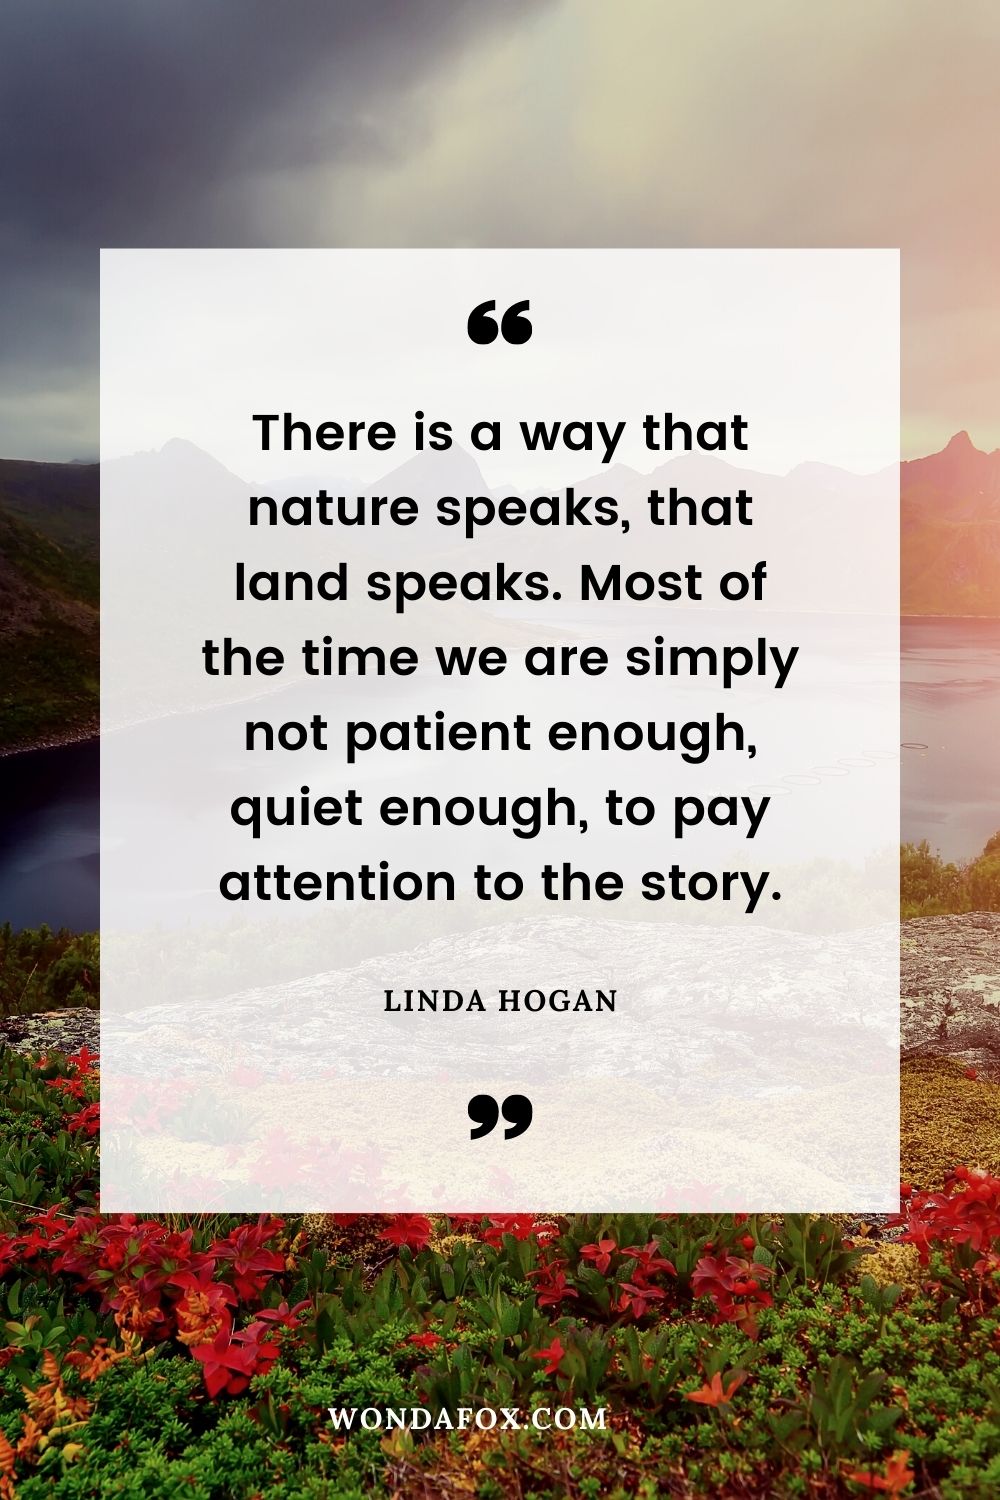 There is a way that nature speaks, that land speaks. Most of the time we are simply not patient enough, quiet enough, to pay attention to the story.